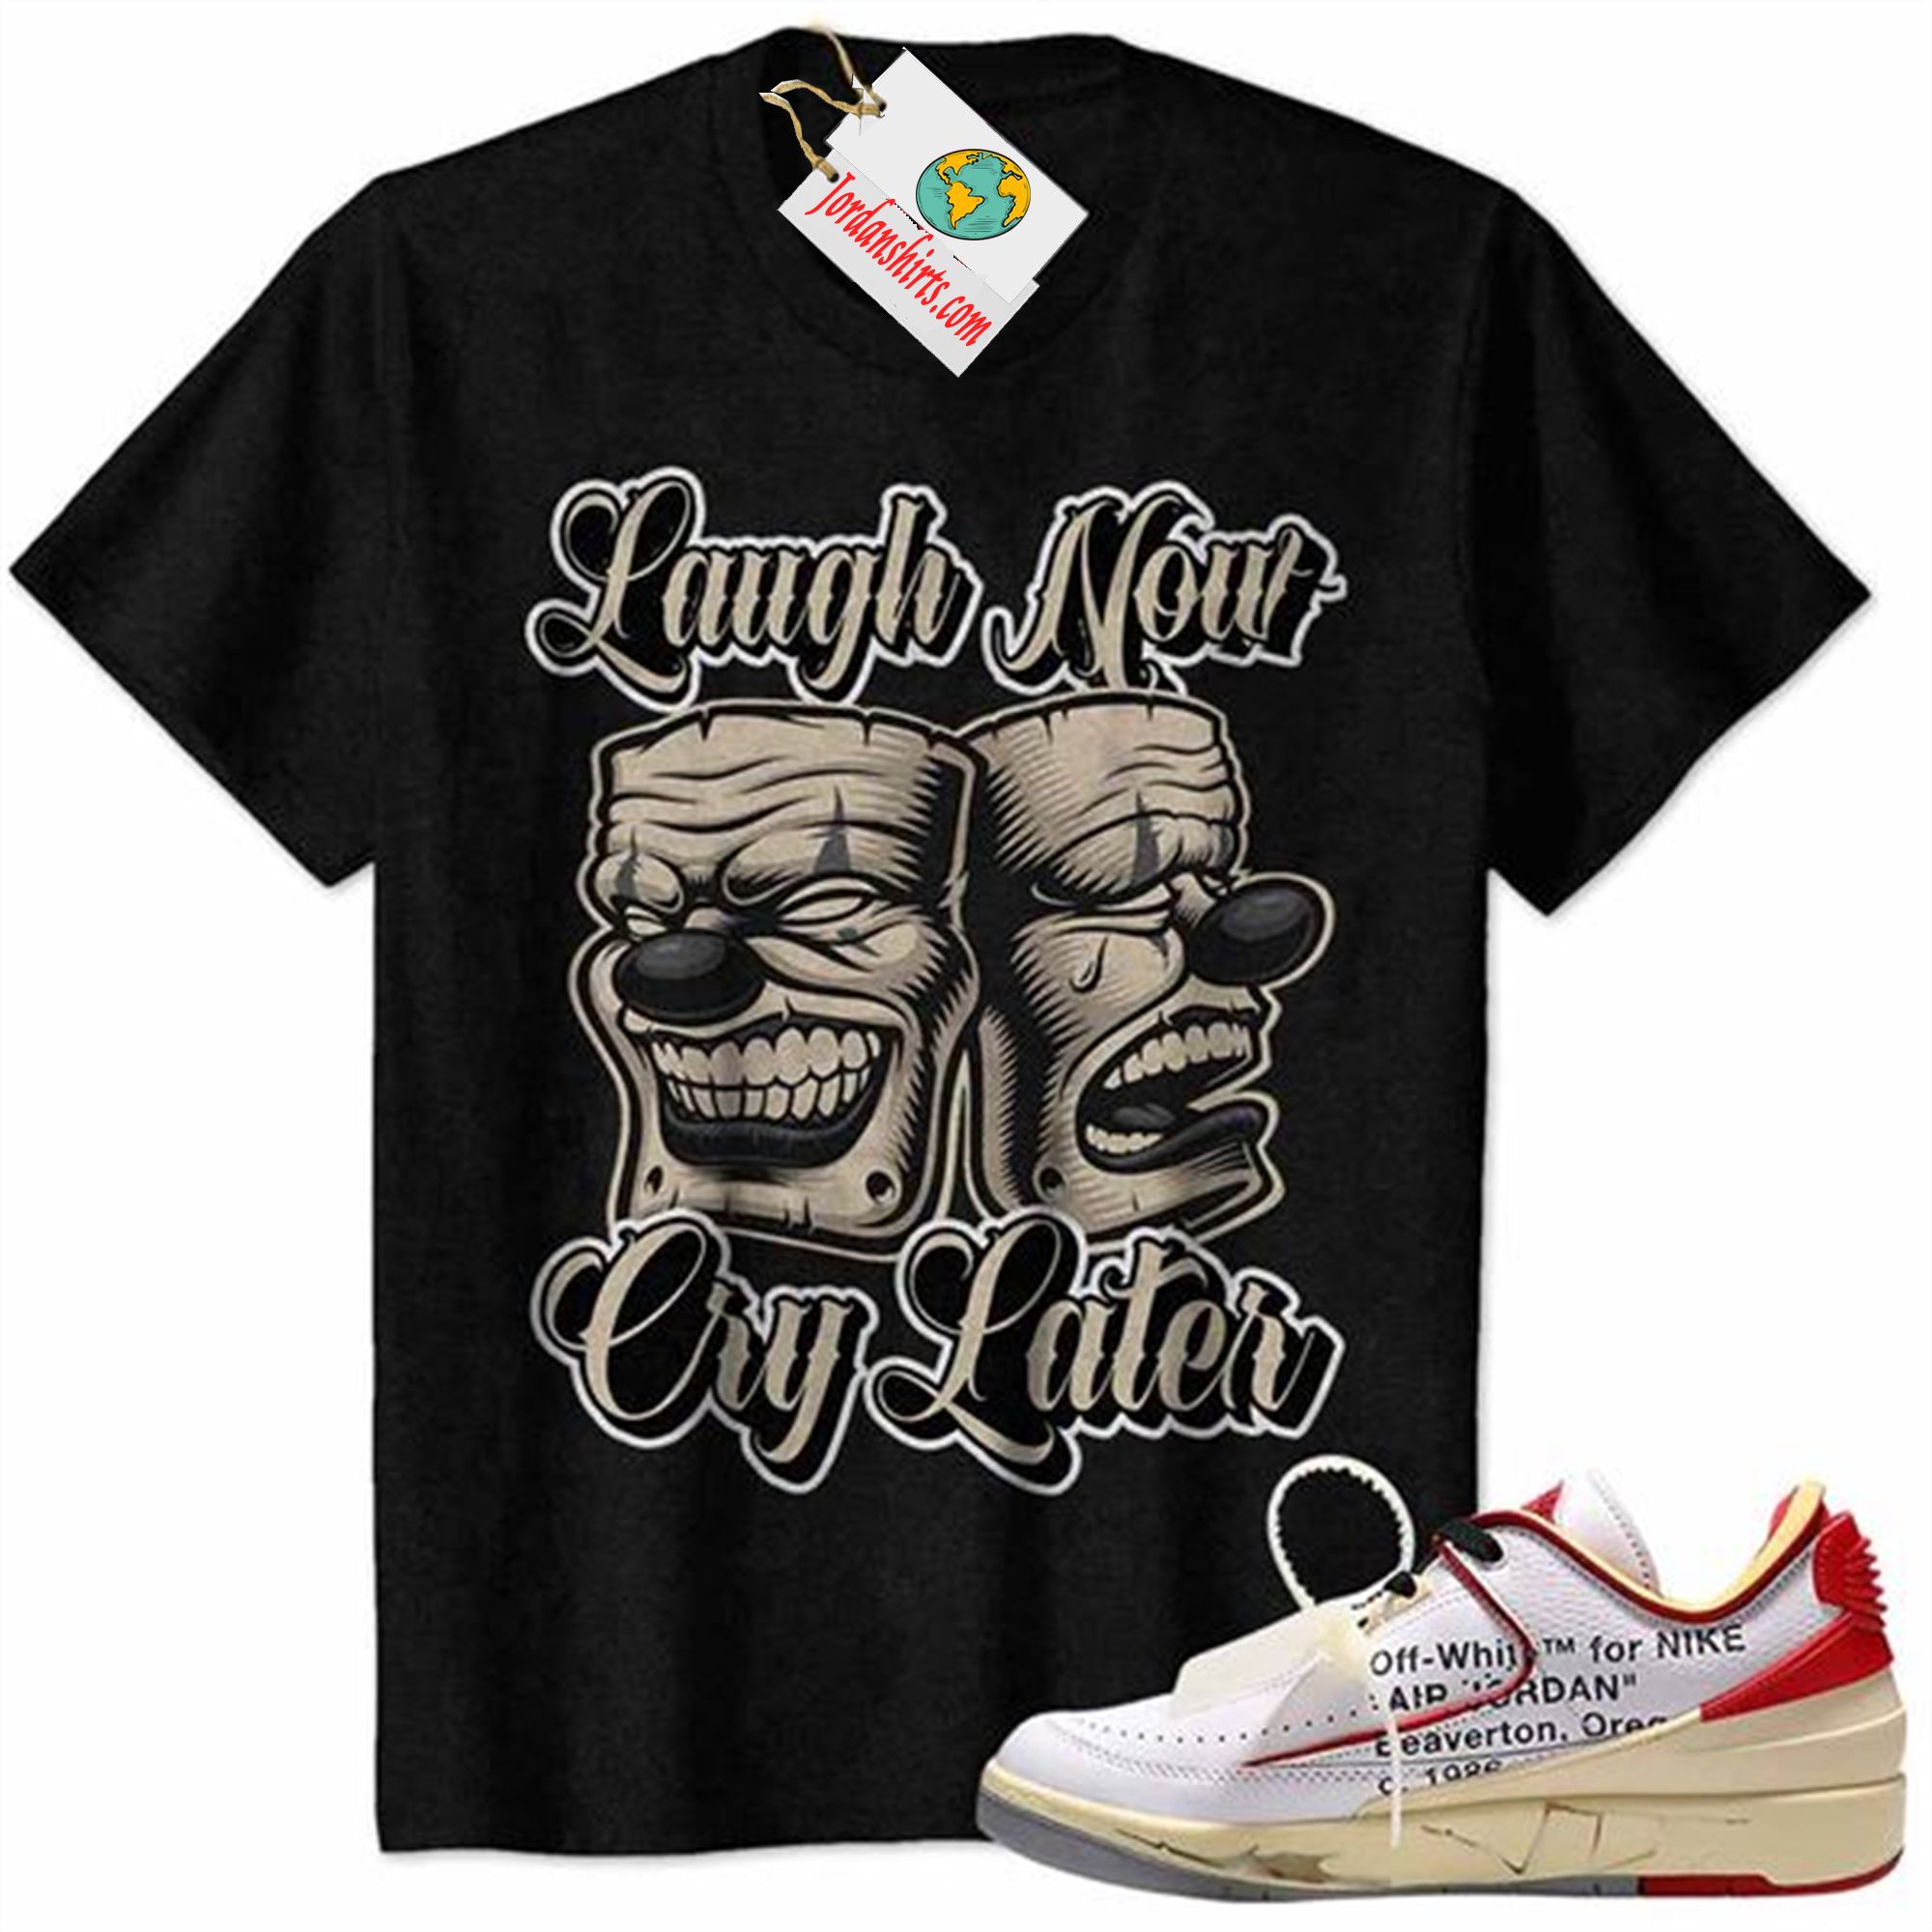 Jordan 2 Shirt, Laugh Now Cry Later Man Clown Mask Black Air Jordan 2 Low White Red Off-white 2s Size Up To 5xl